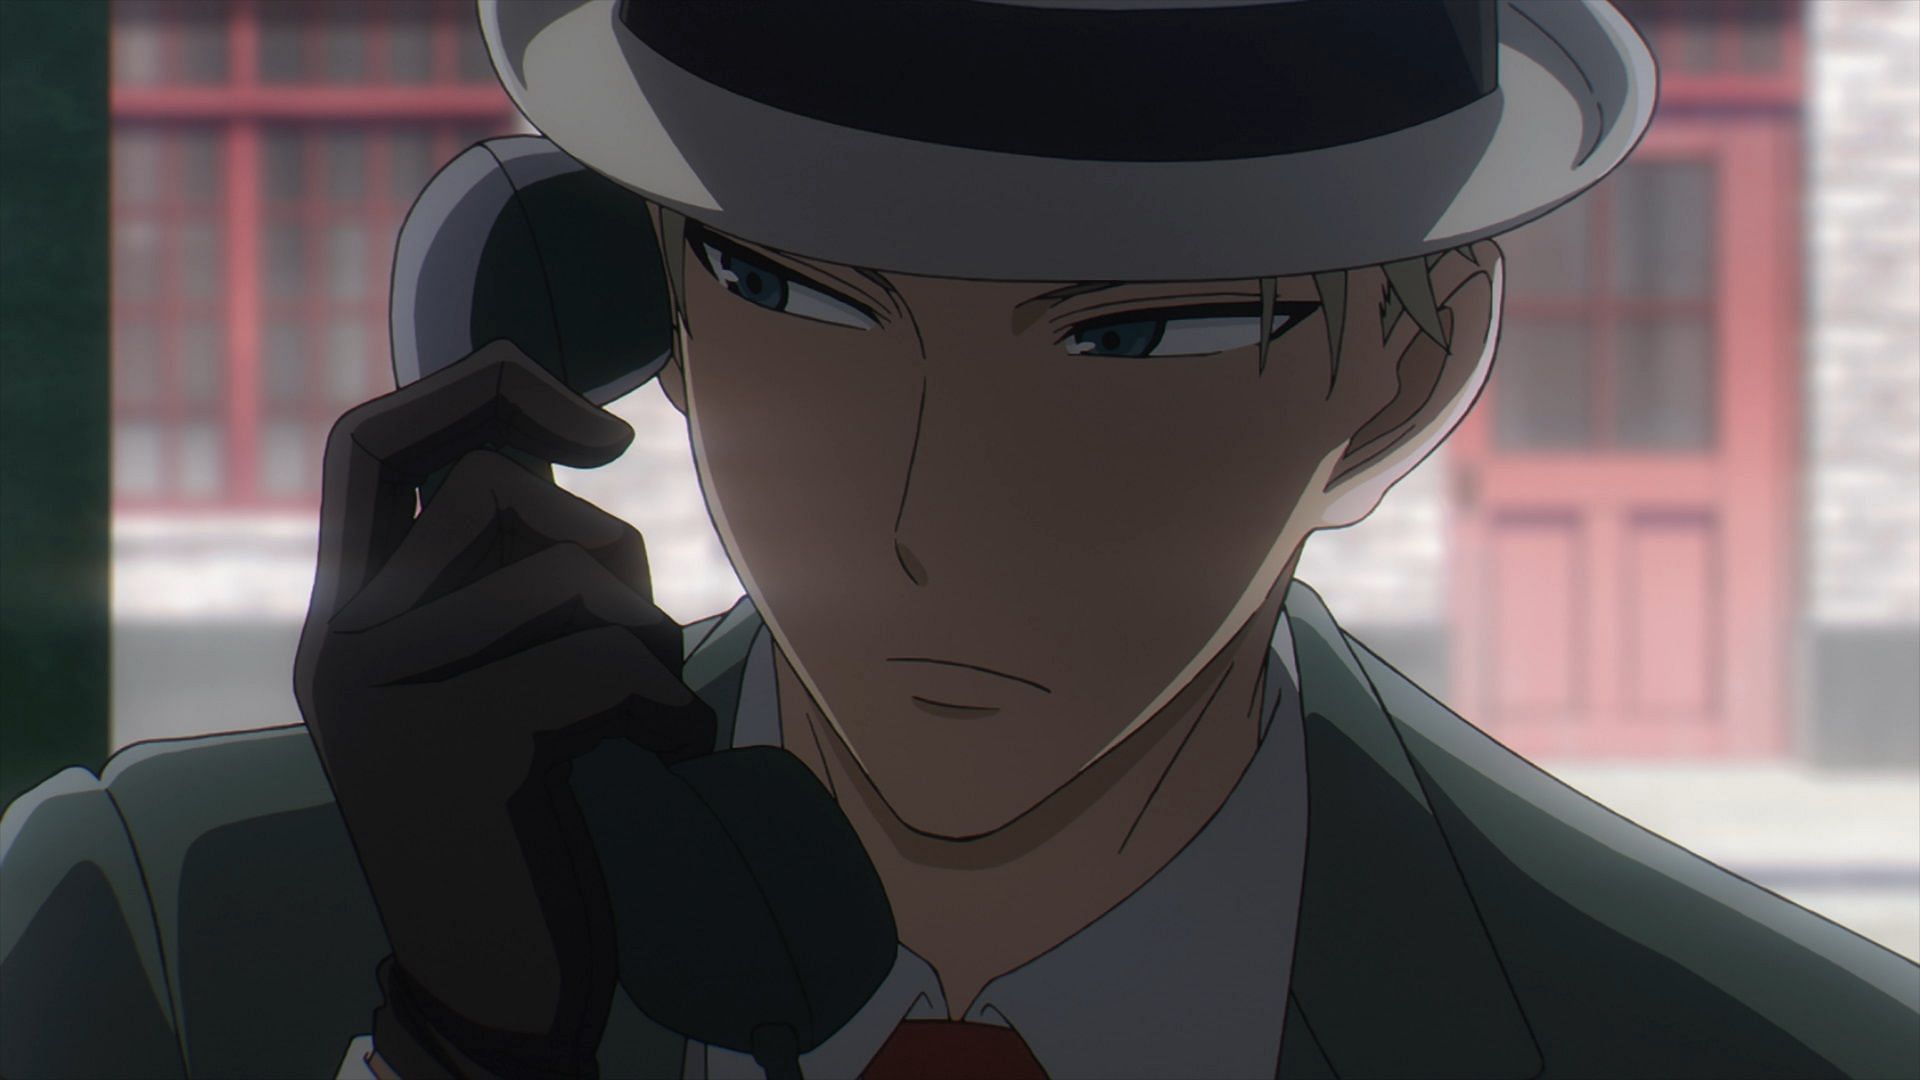 SPY x FAMILY Part 2 Episode 13 Finale Release Date and Time on Crunchyroll  - GameRevolution